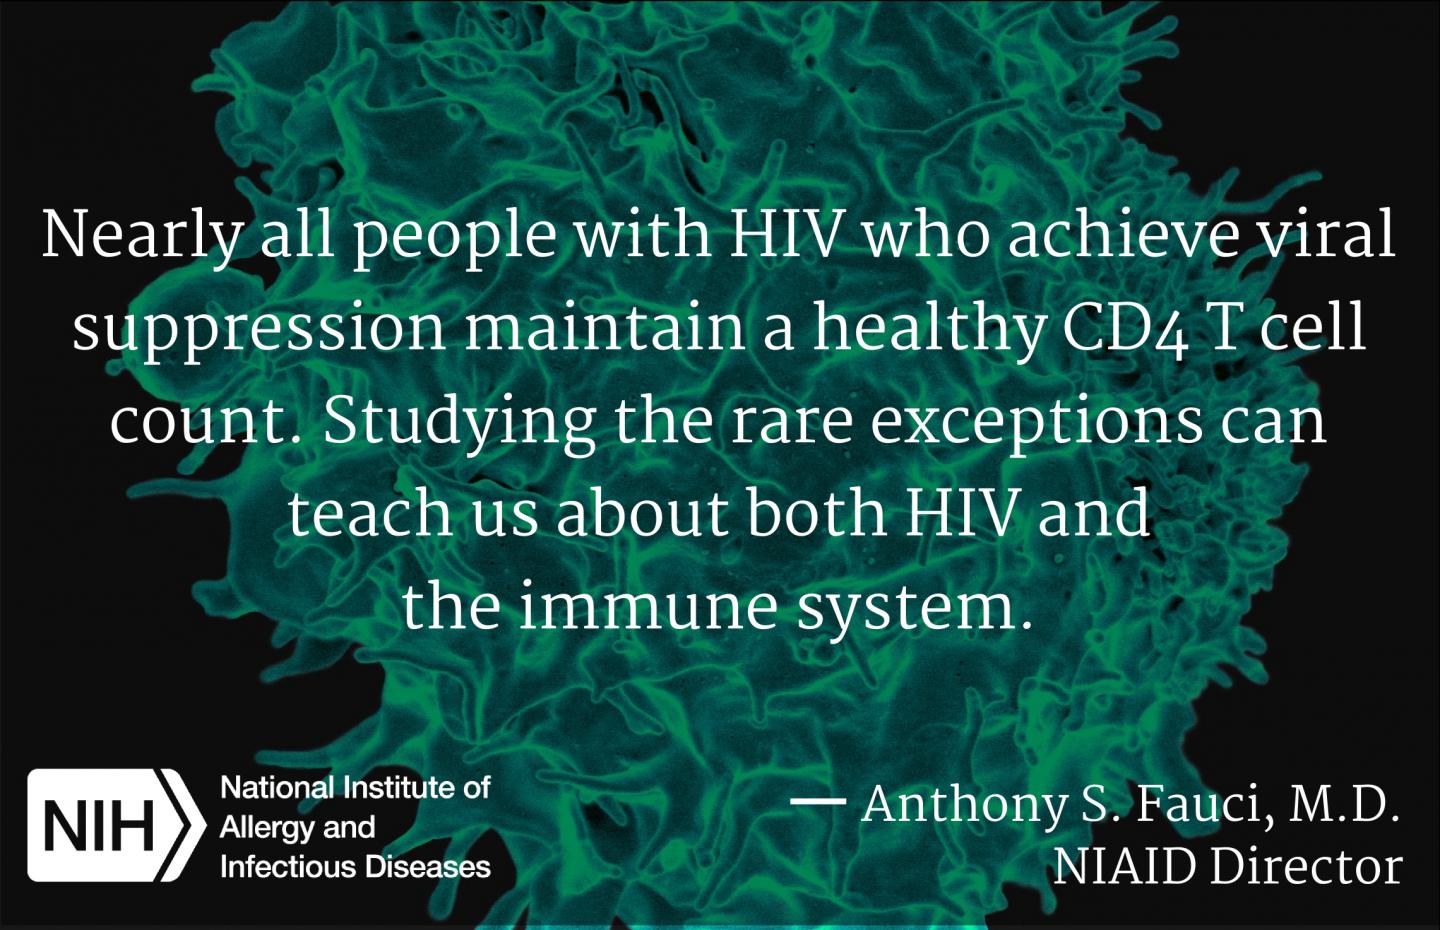 Quote from NIAID Director Dr. Anthony Fauci